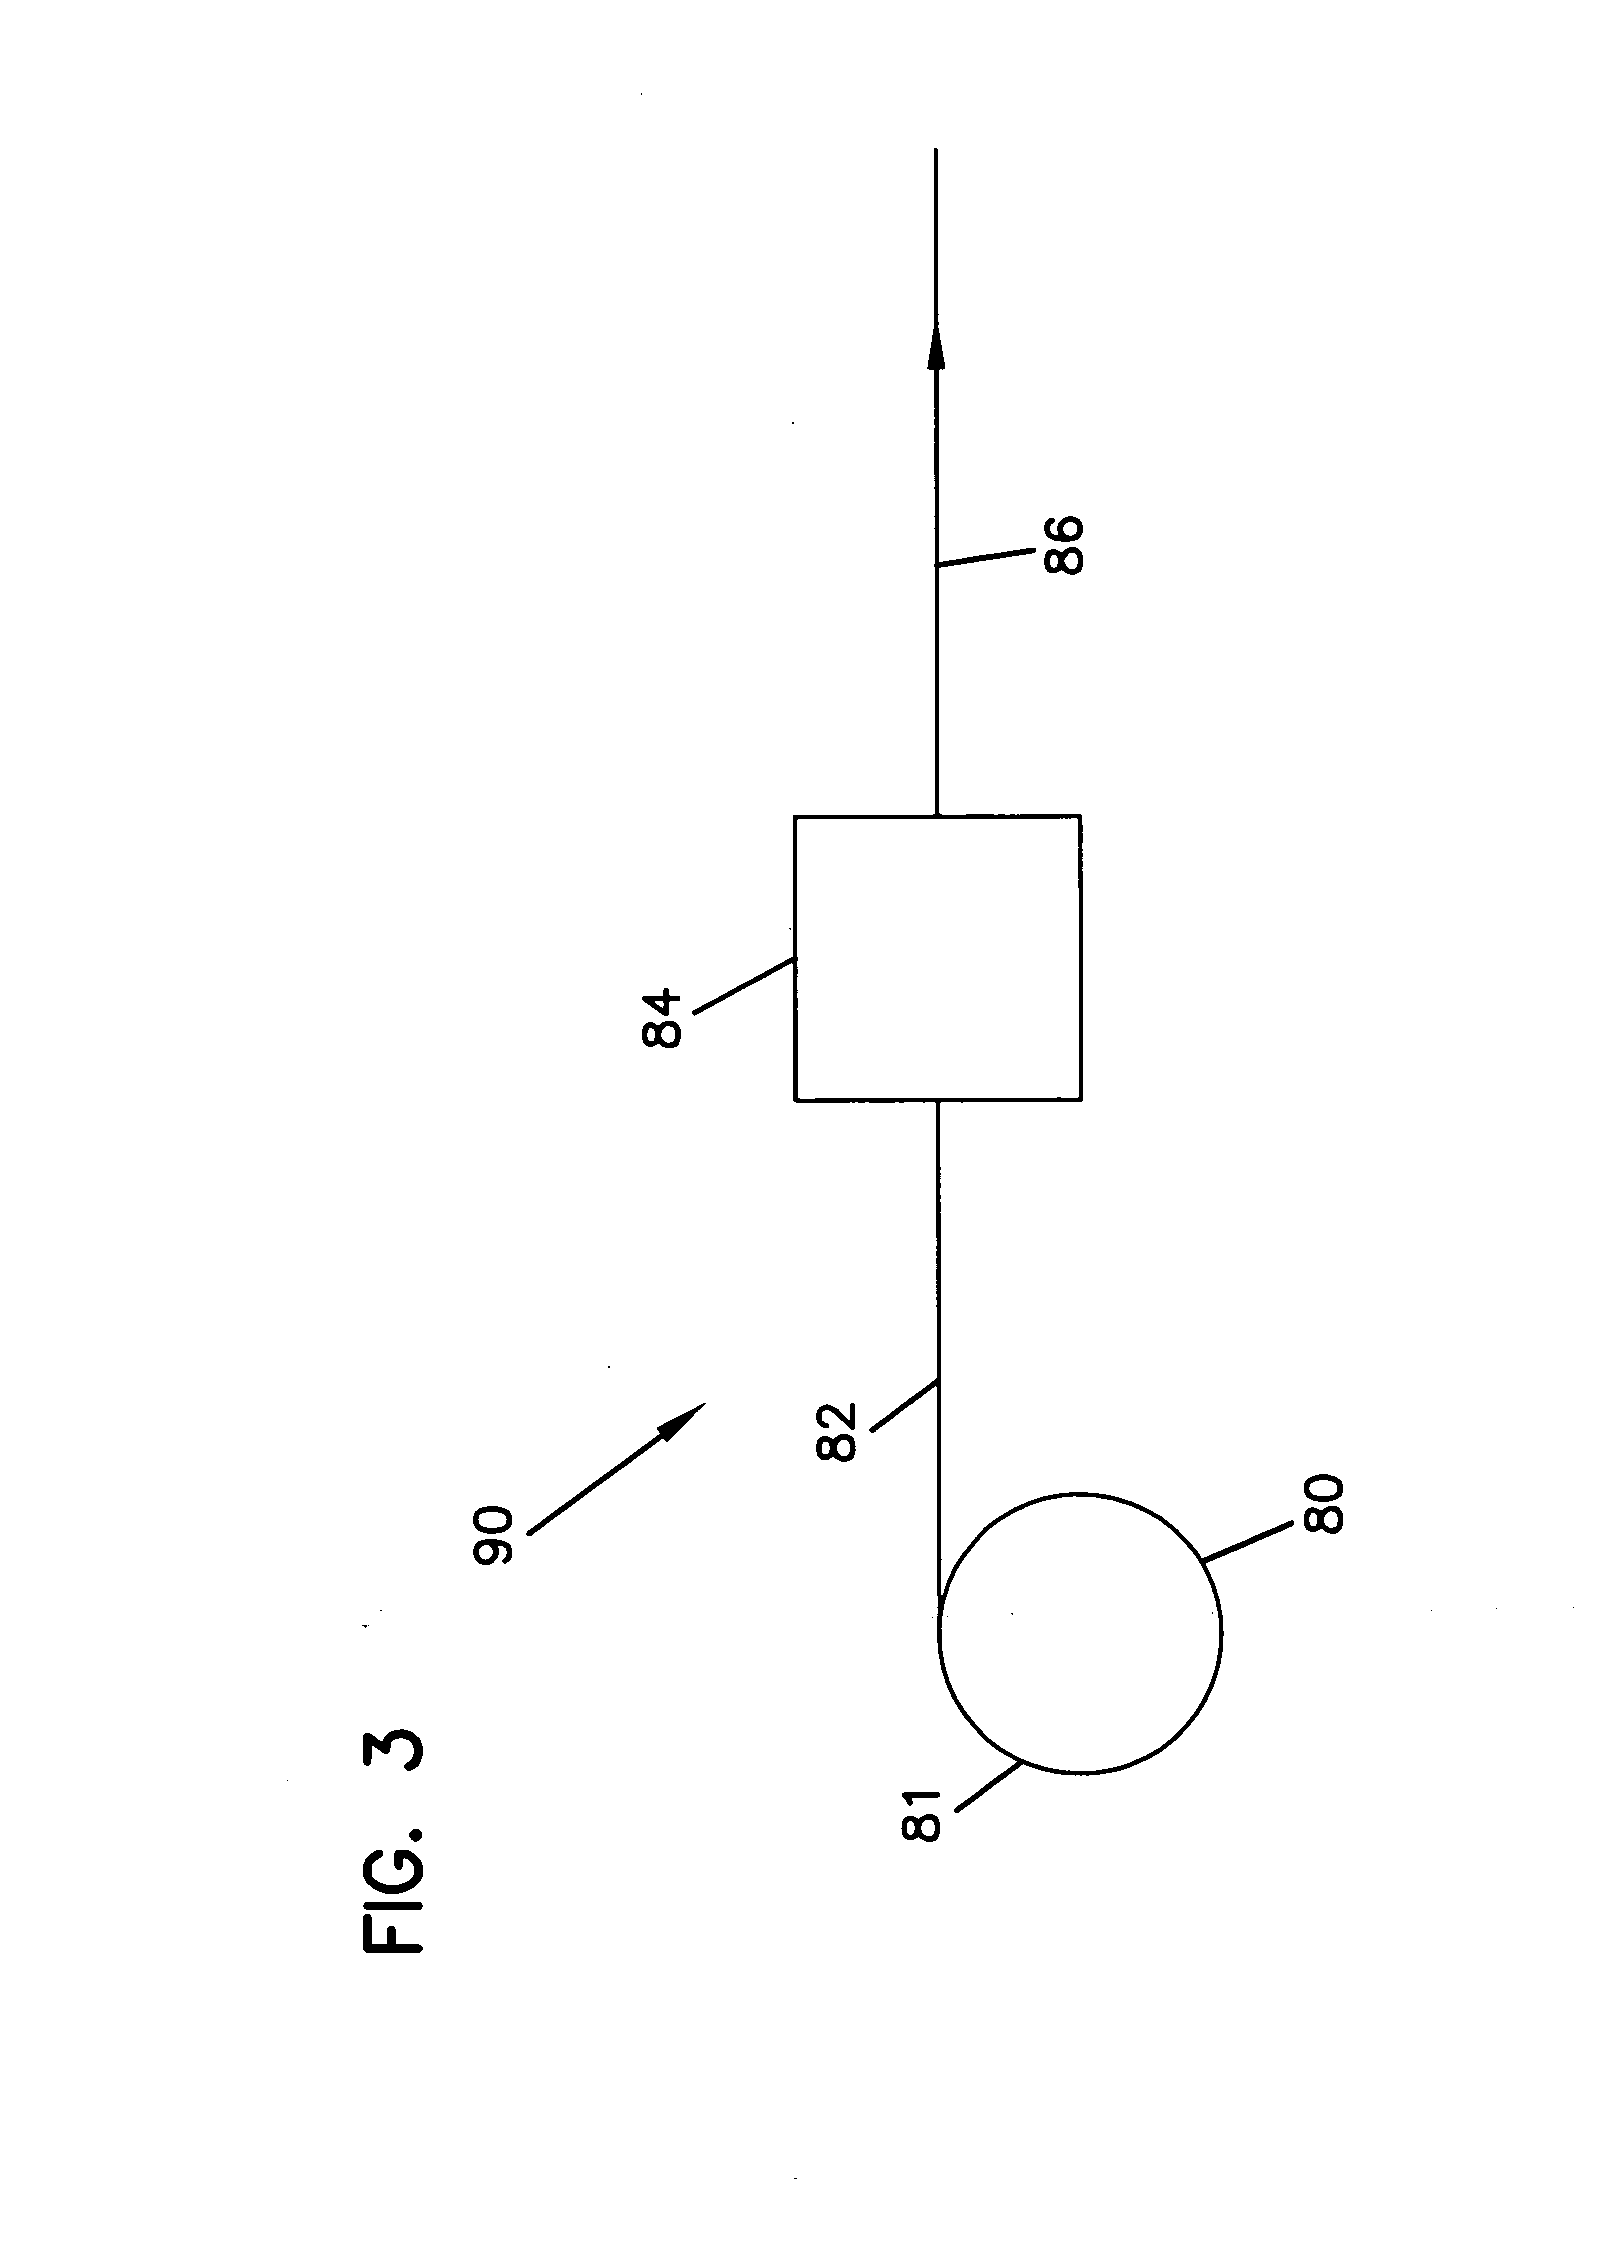 Creped paper product and method for manufacturing